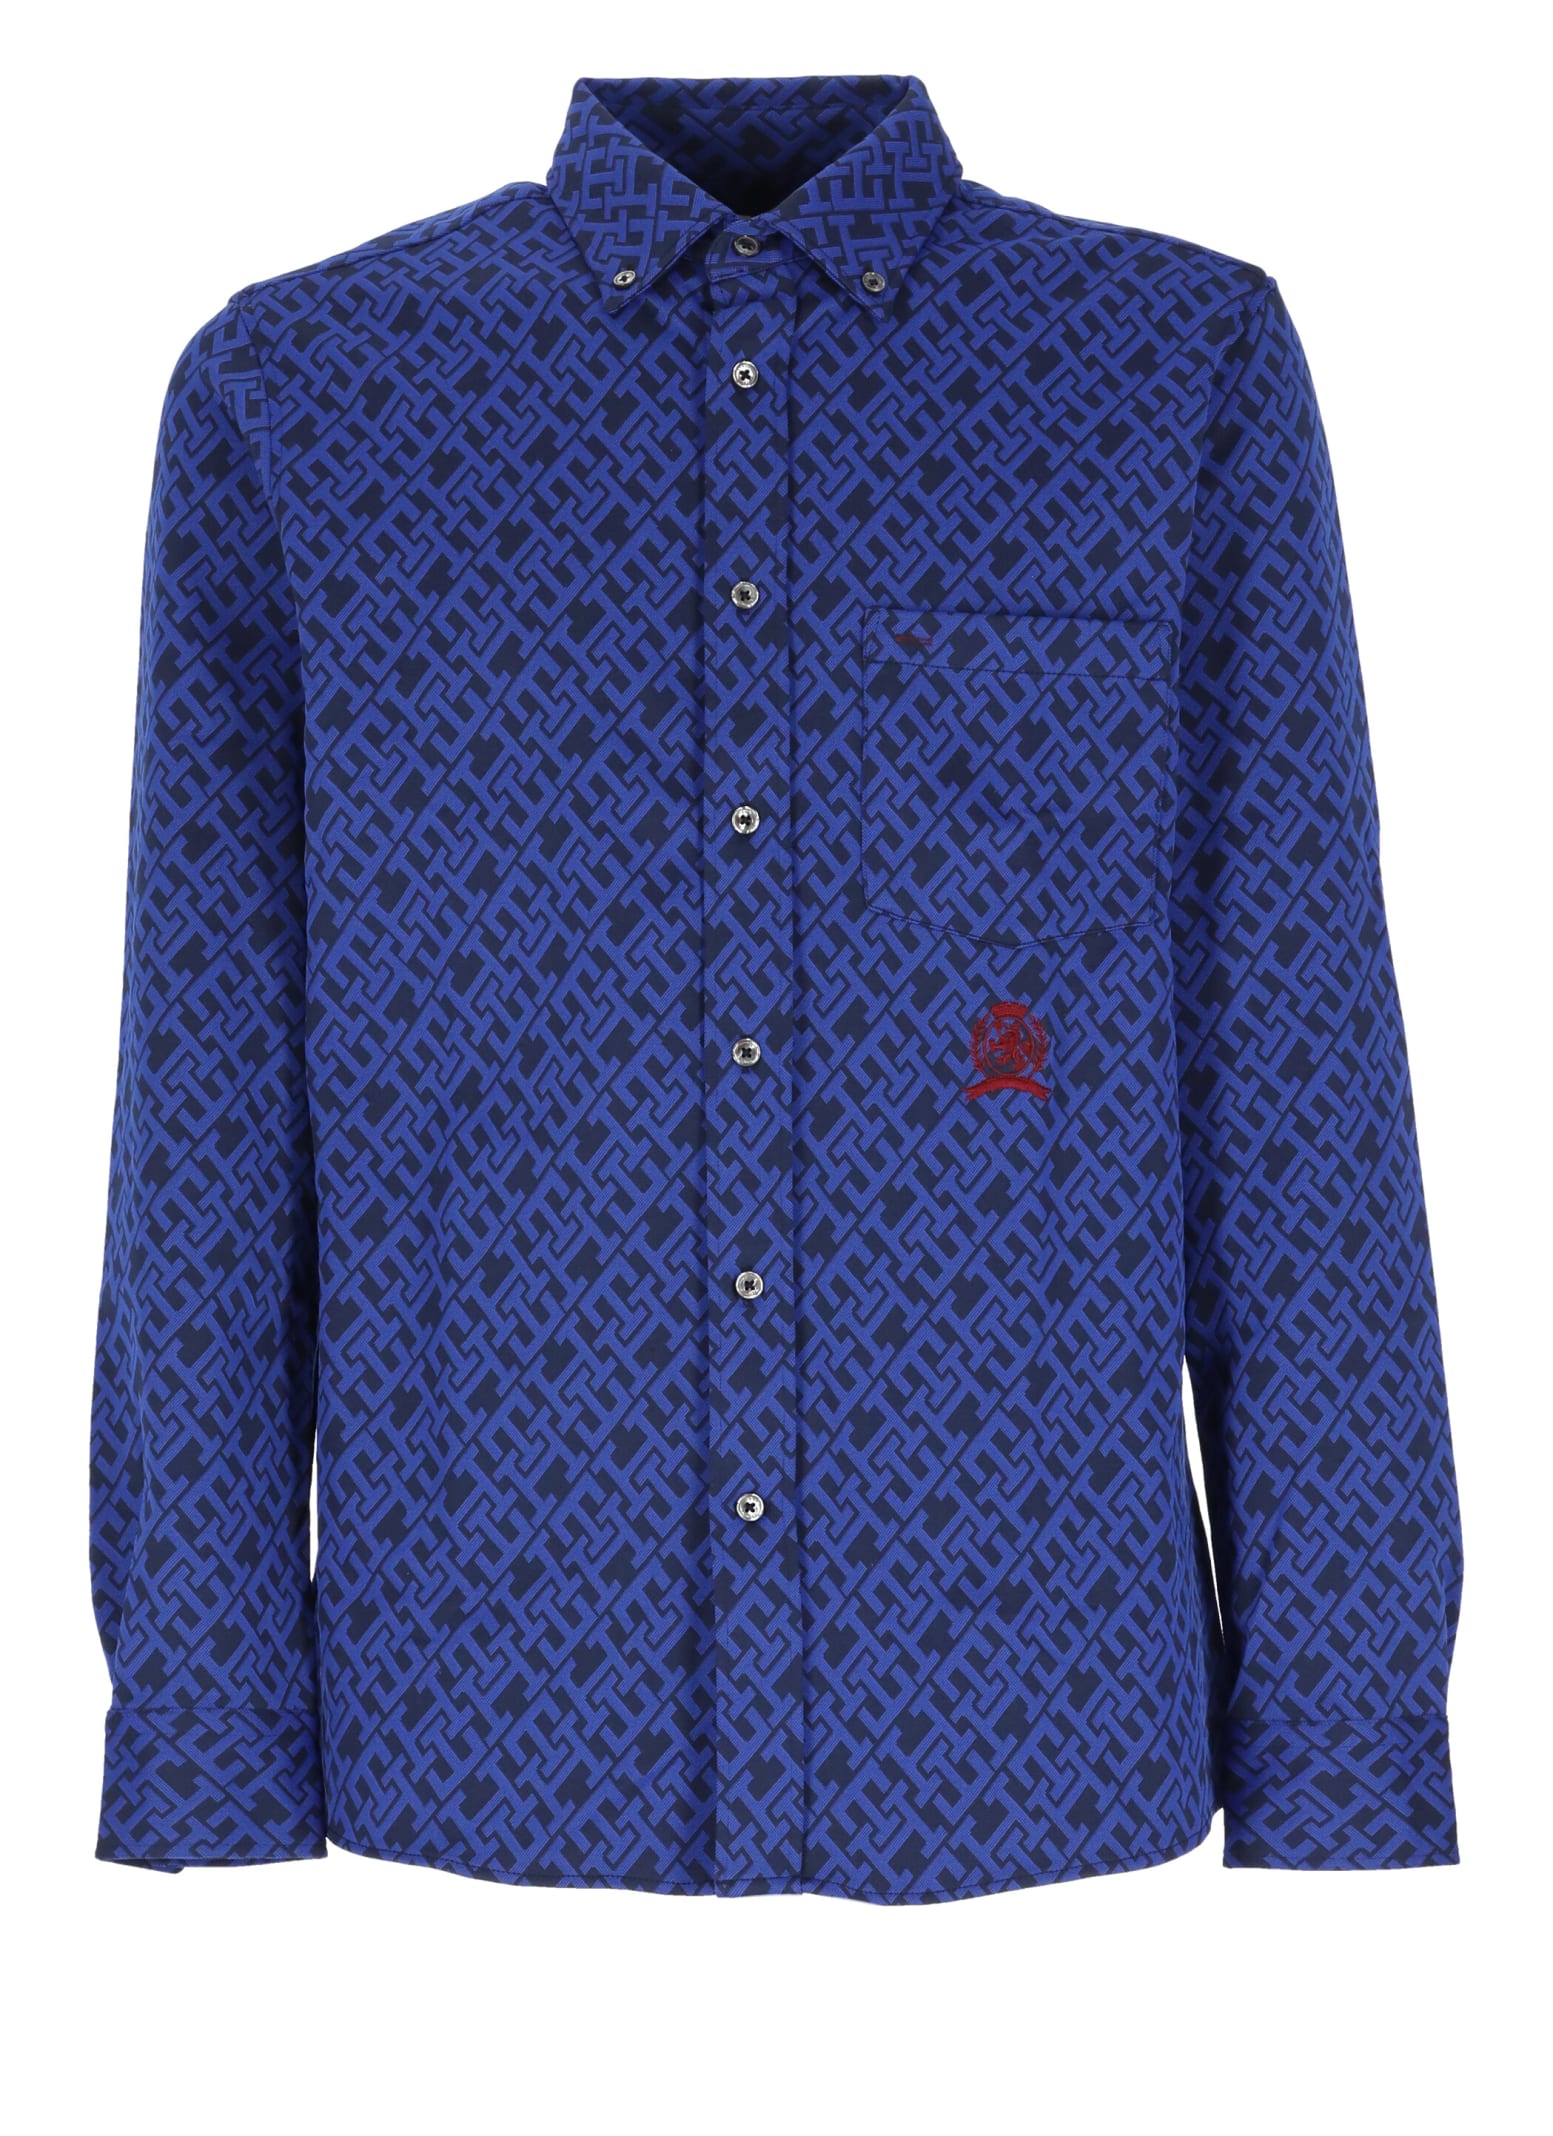 Tommy Hilfiger Shirt With Thl Monogram